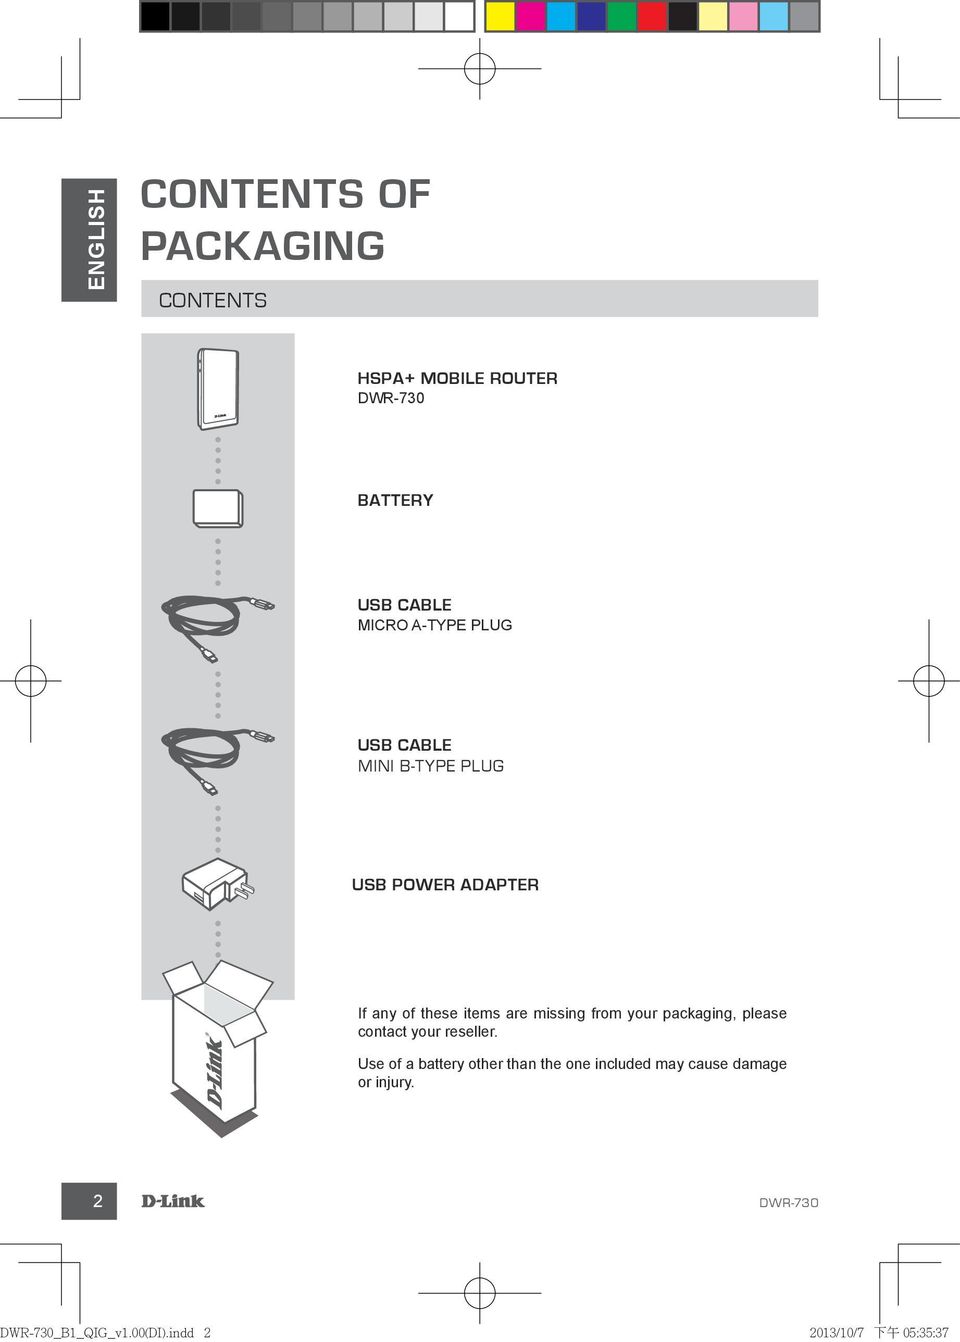 any of these items are missing from your packaging, please contact your